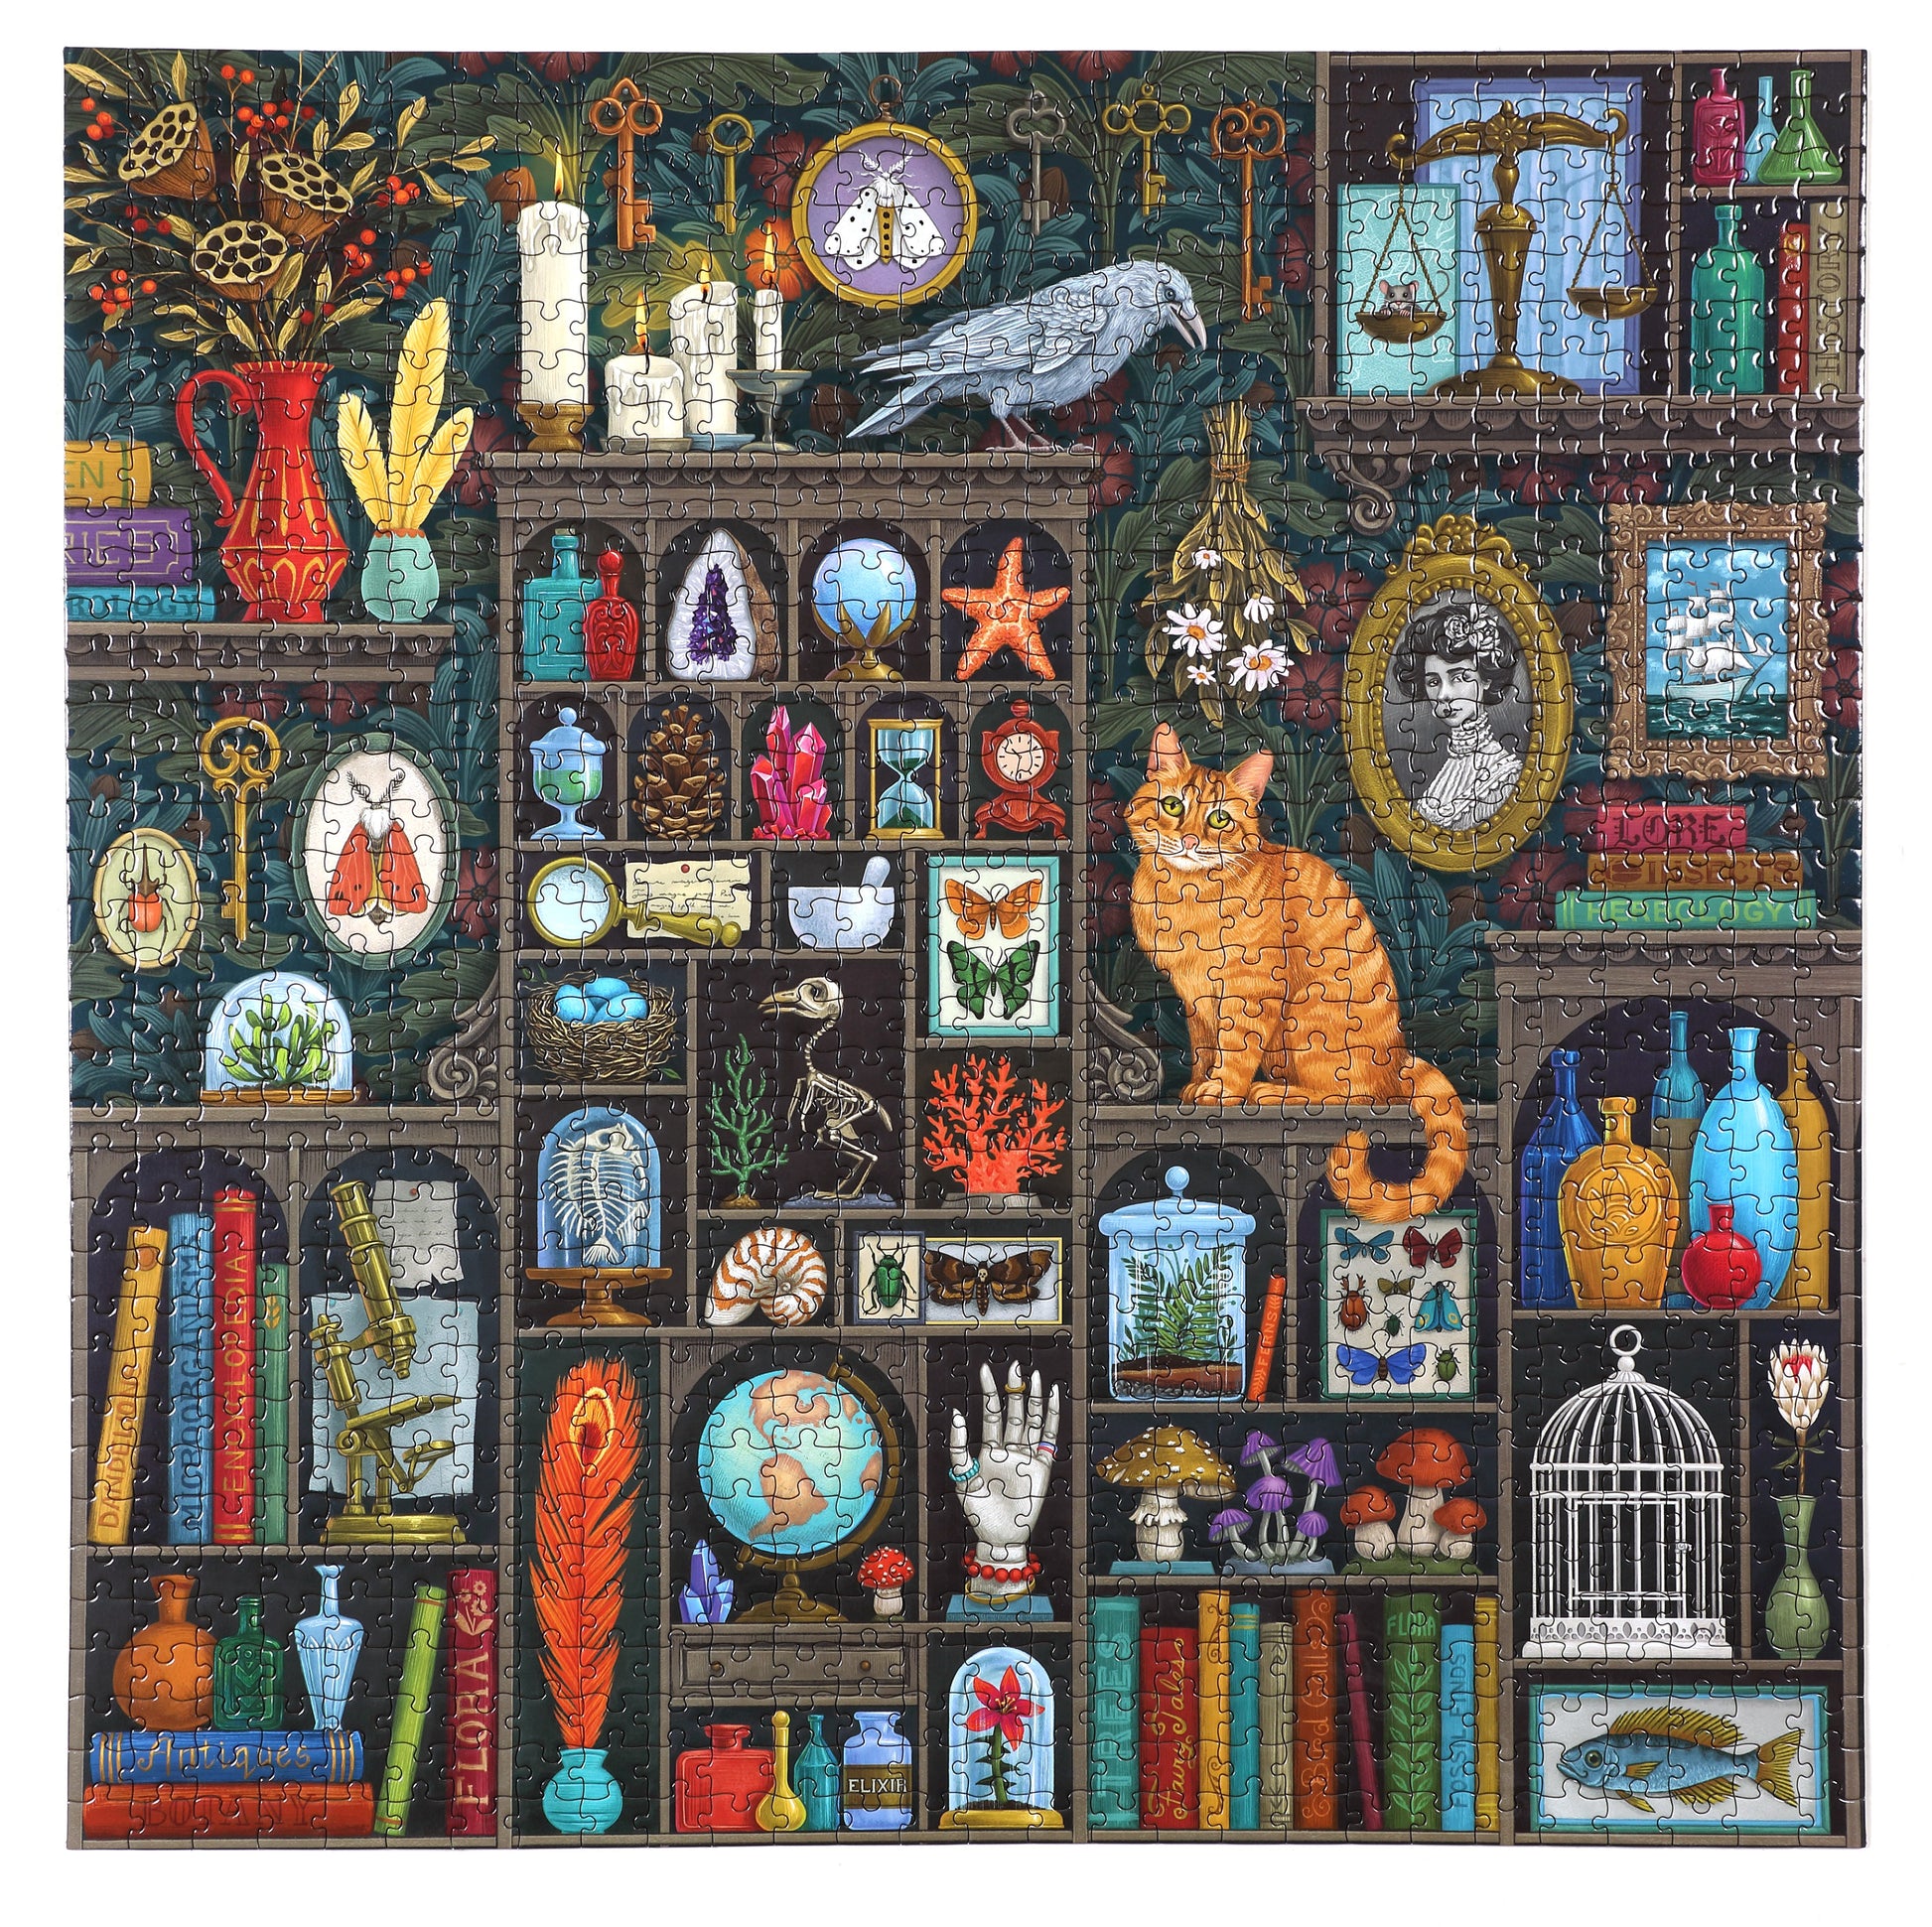  Art Puzzle Stitch in Time 1000 pc. Jigsaw Puzzle for